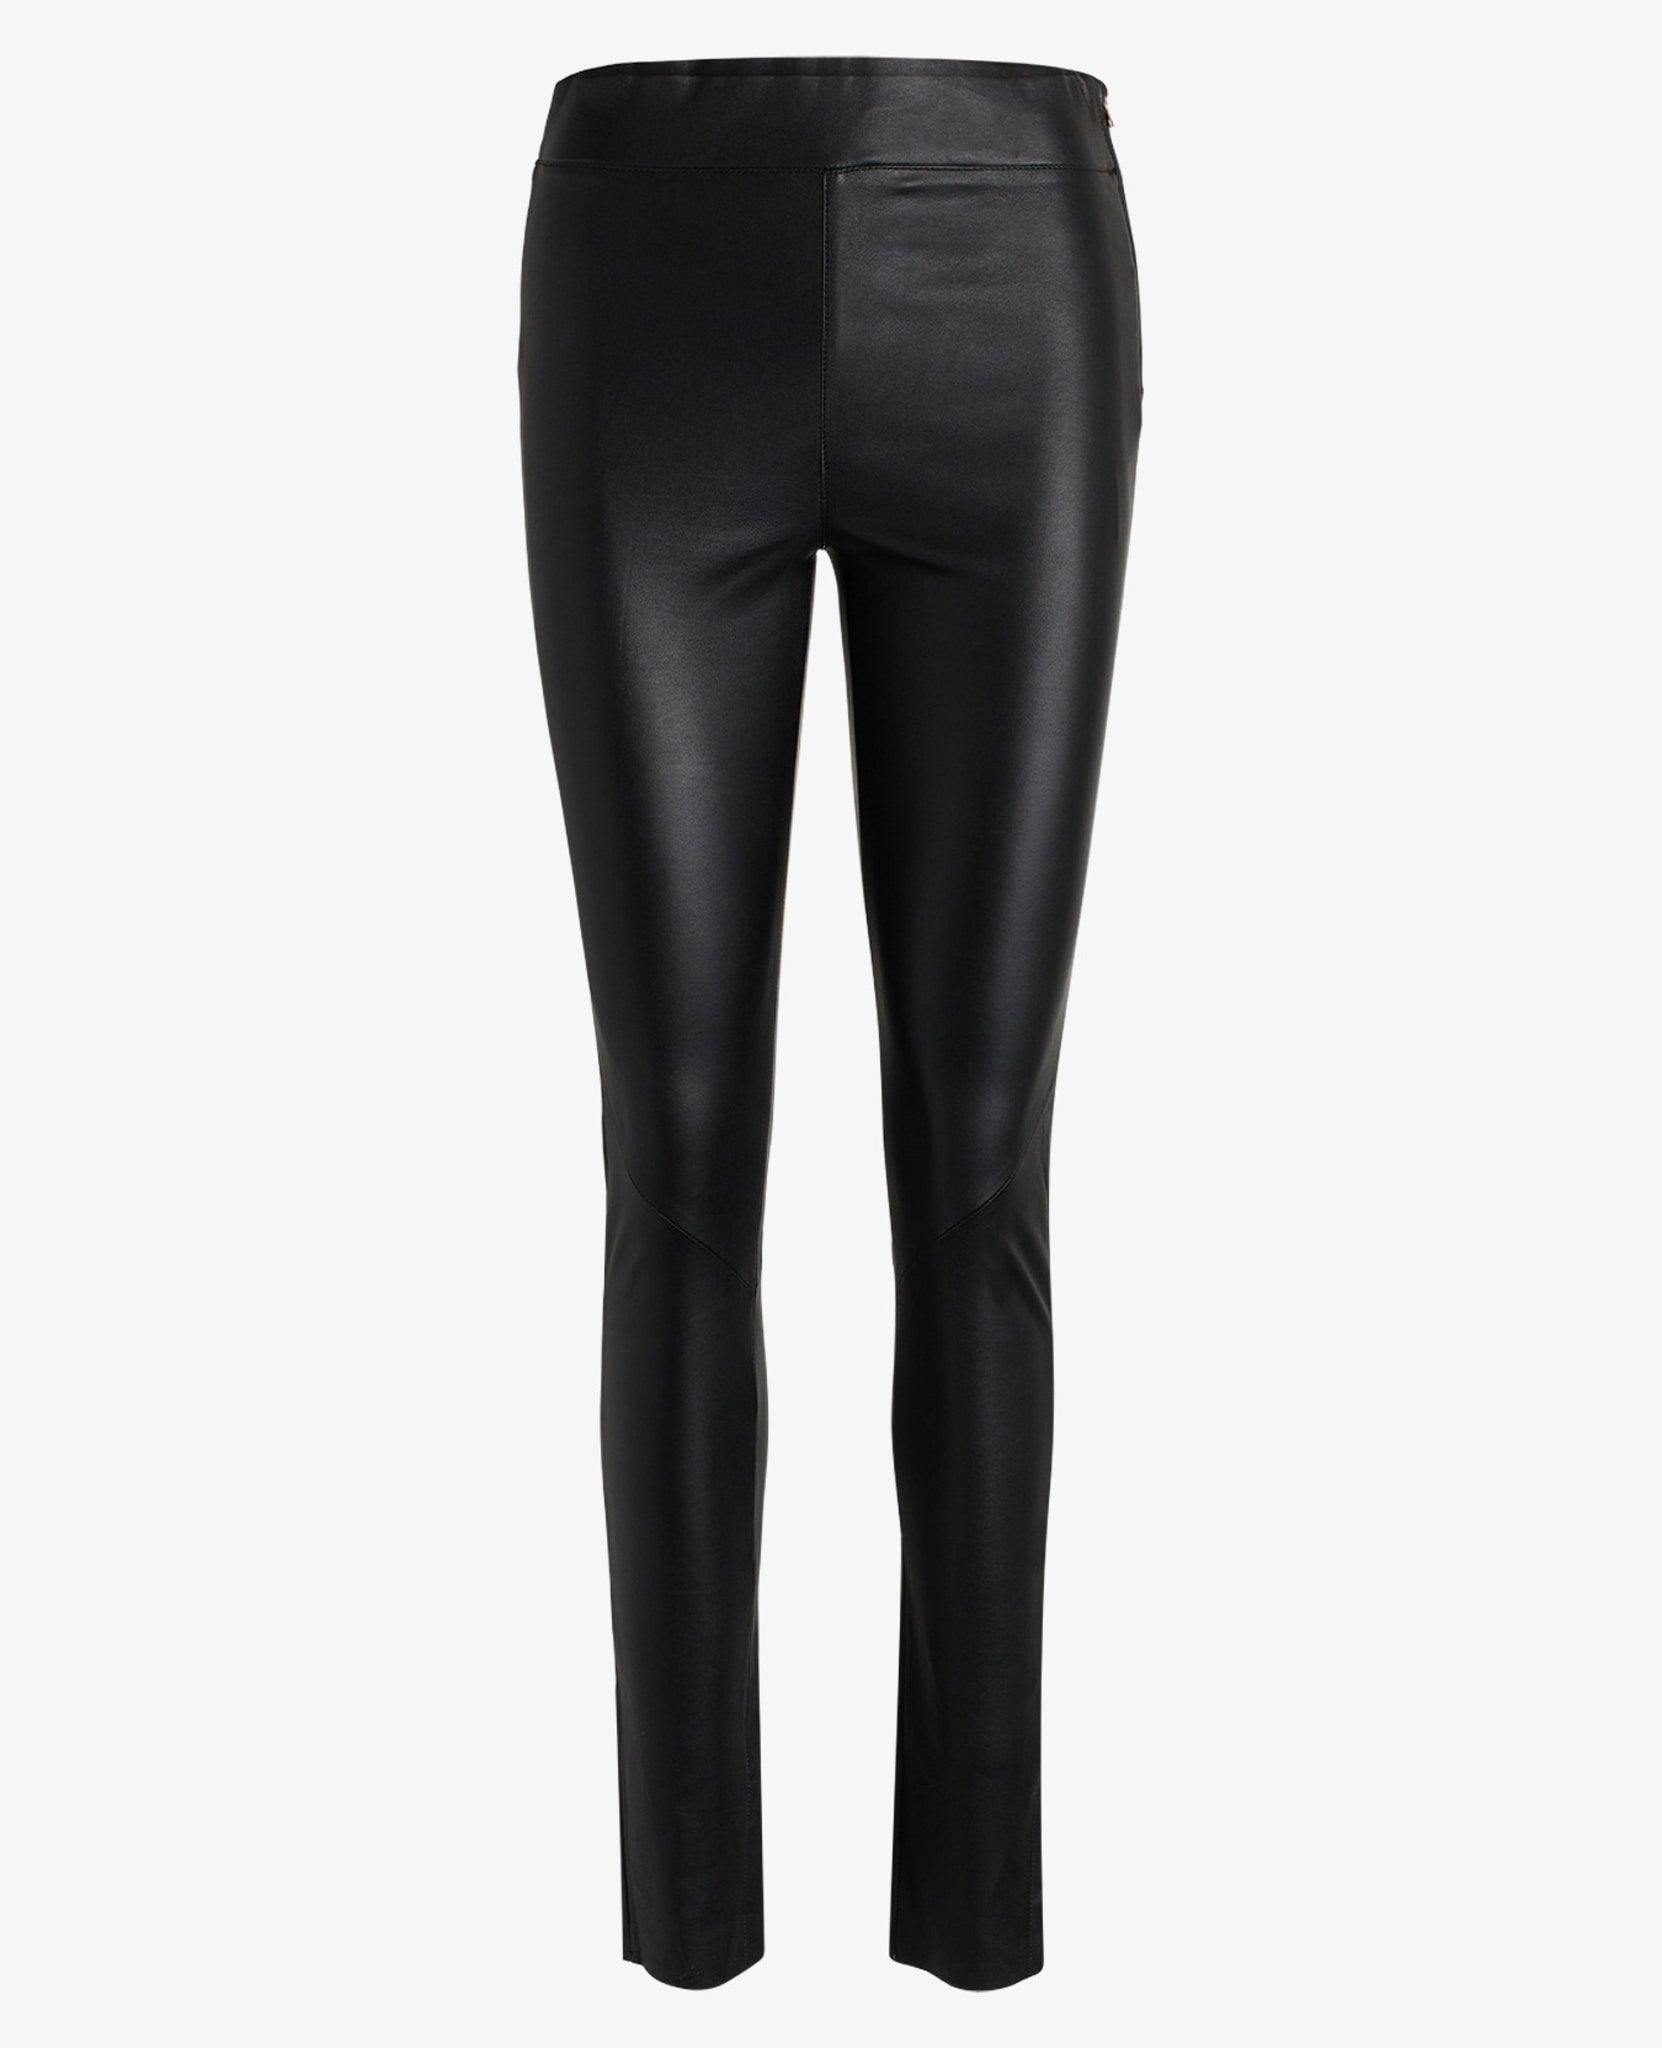 Leather pants Nora black with elastic waistband and zipper on the back  Leggings made of real lamb nappa leather Bitte Größe wählen (Select) Größe S